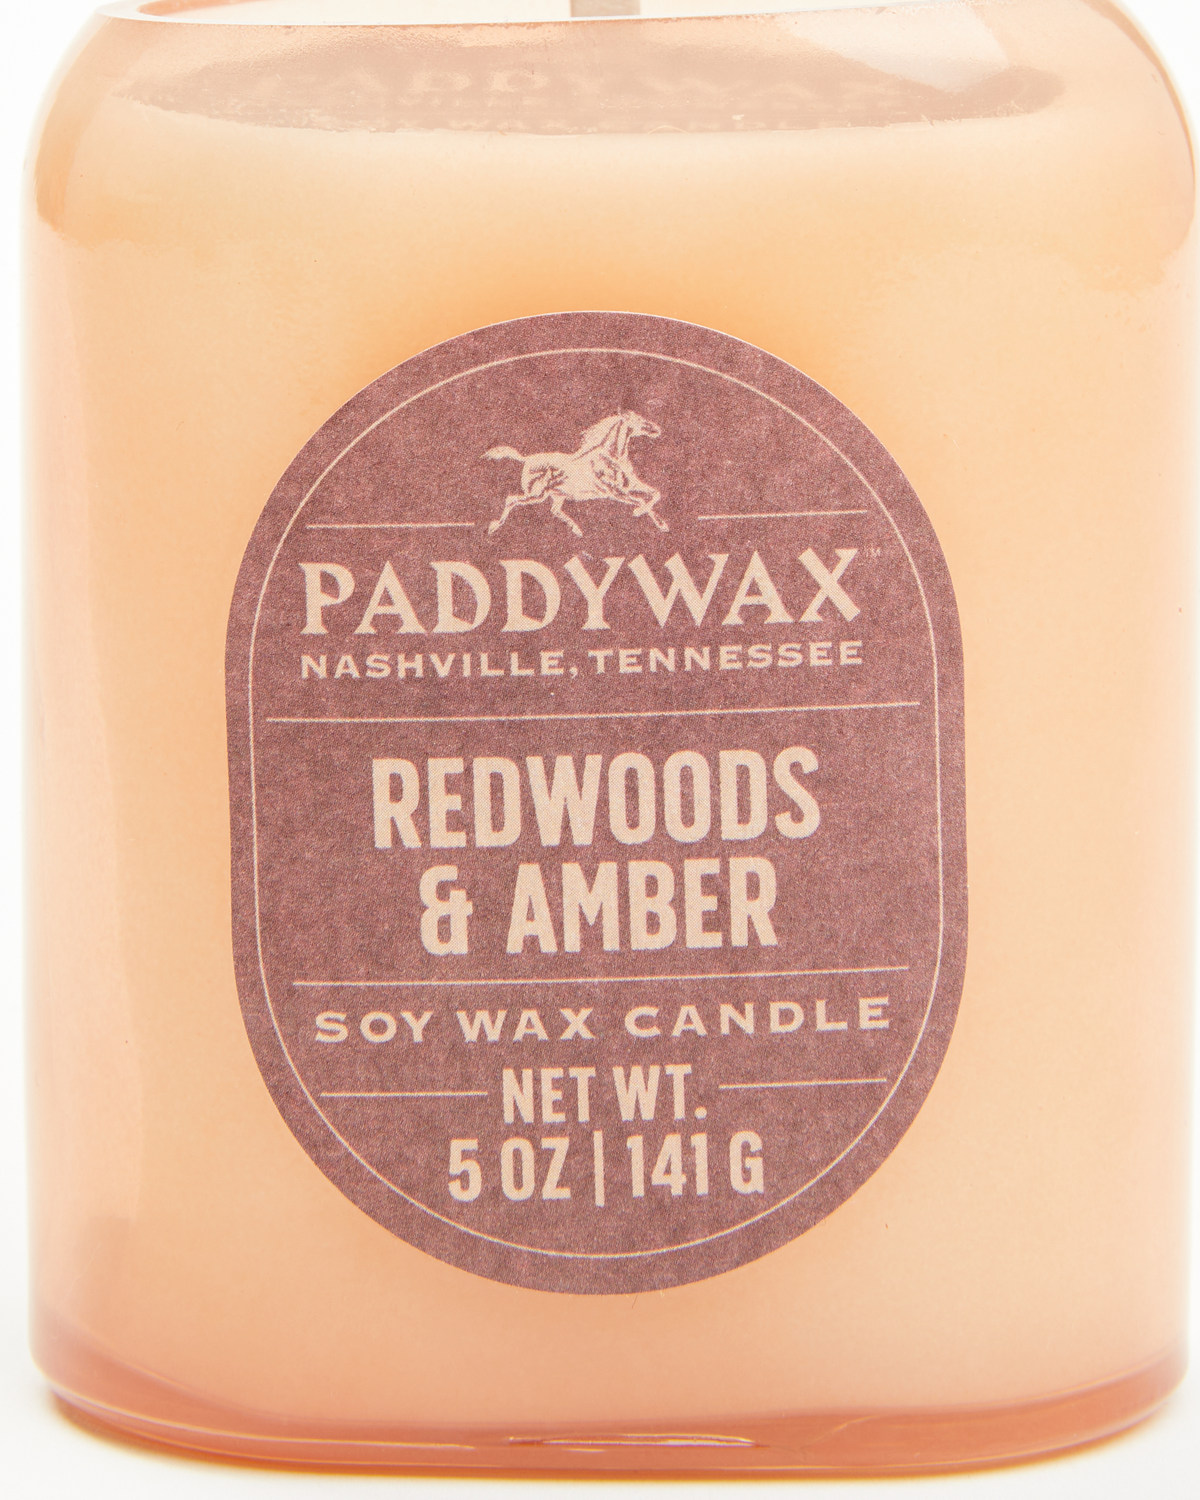 Paddywax Vista 5oz Redwoods & Amber Glass Candle